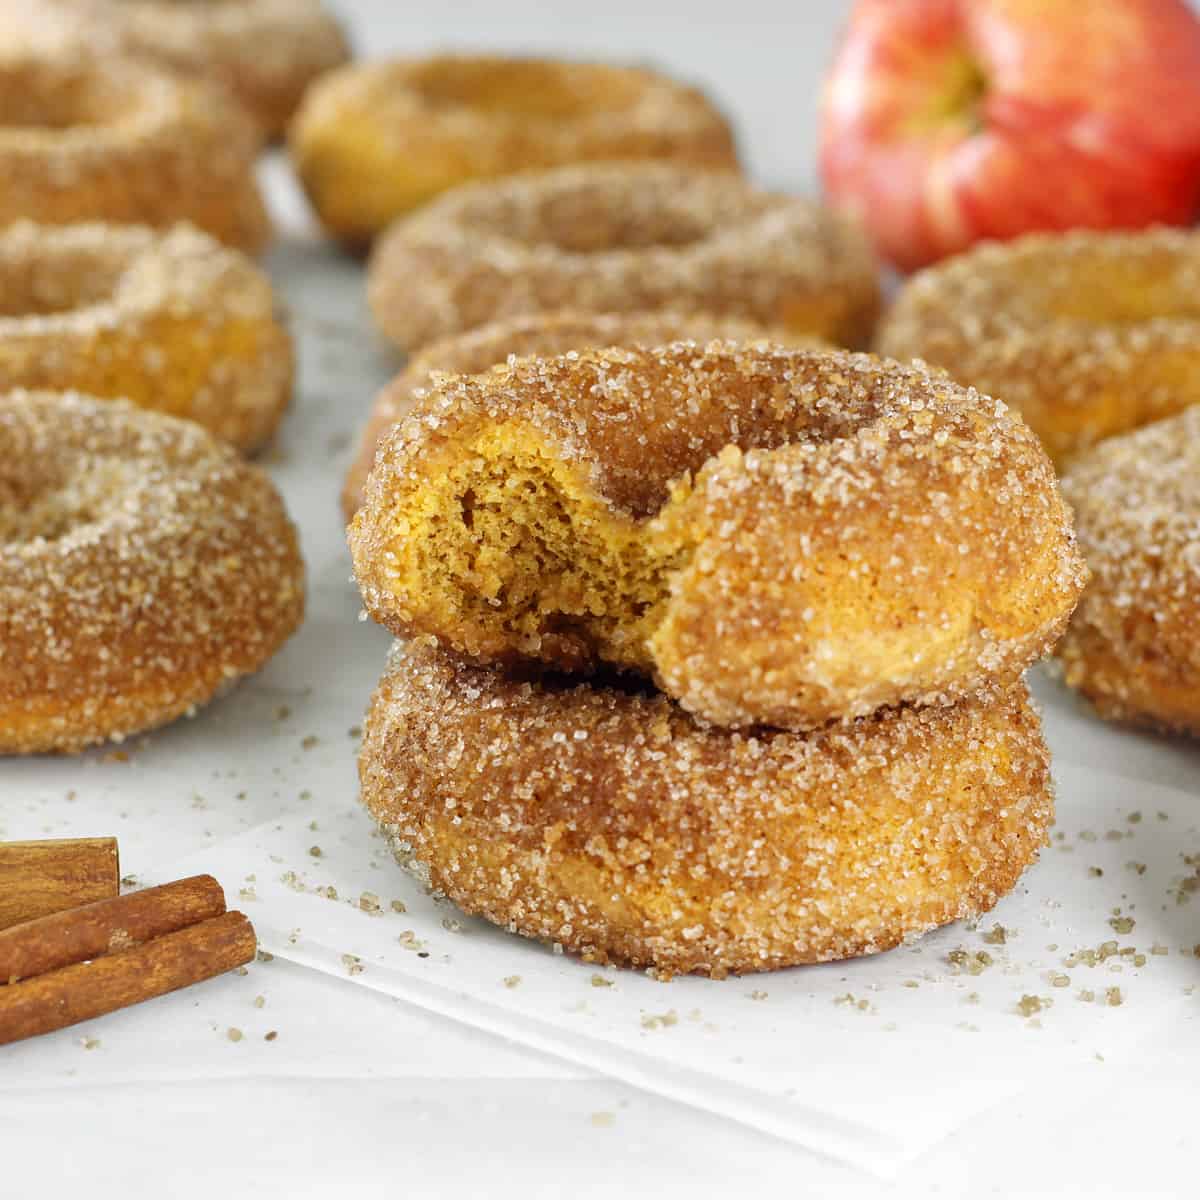 Apple Cider Donuts stacked on a parchment paper on a table with a bite out